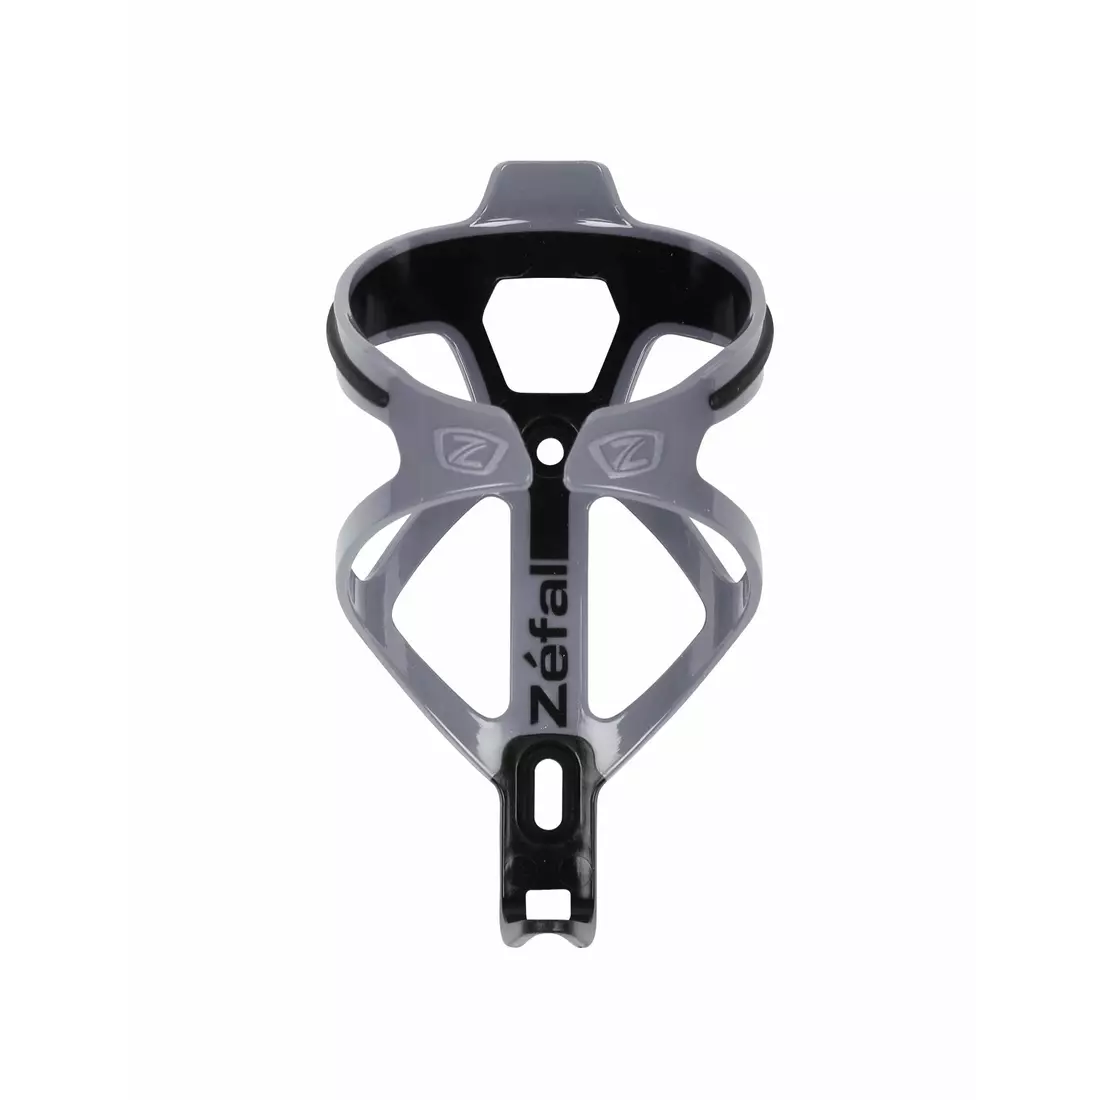 ZEFAL PULSE B2 bicycle bottle cage, gray